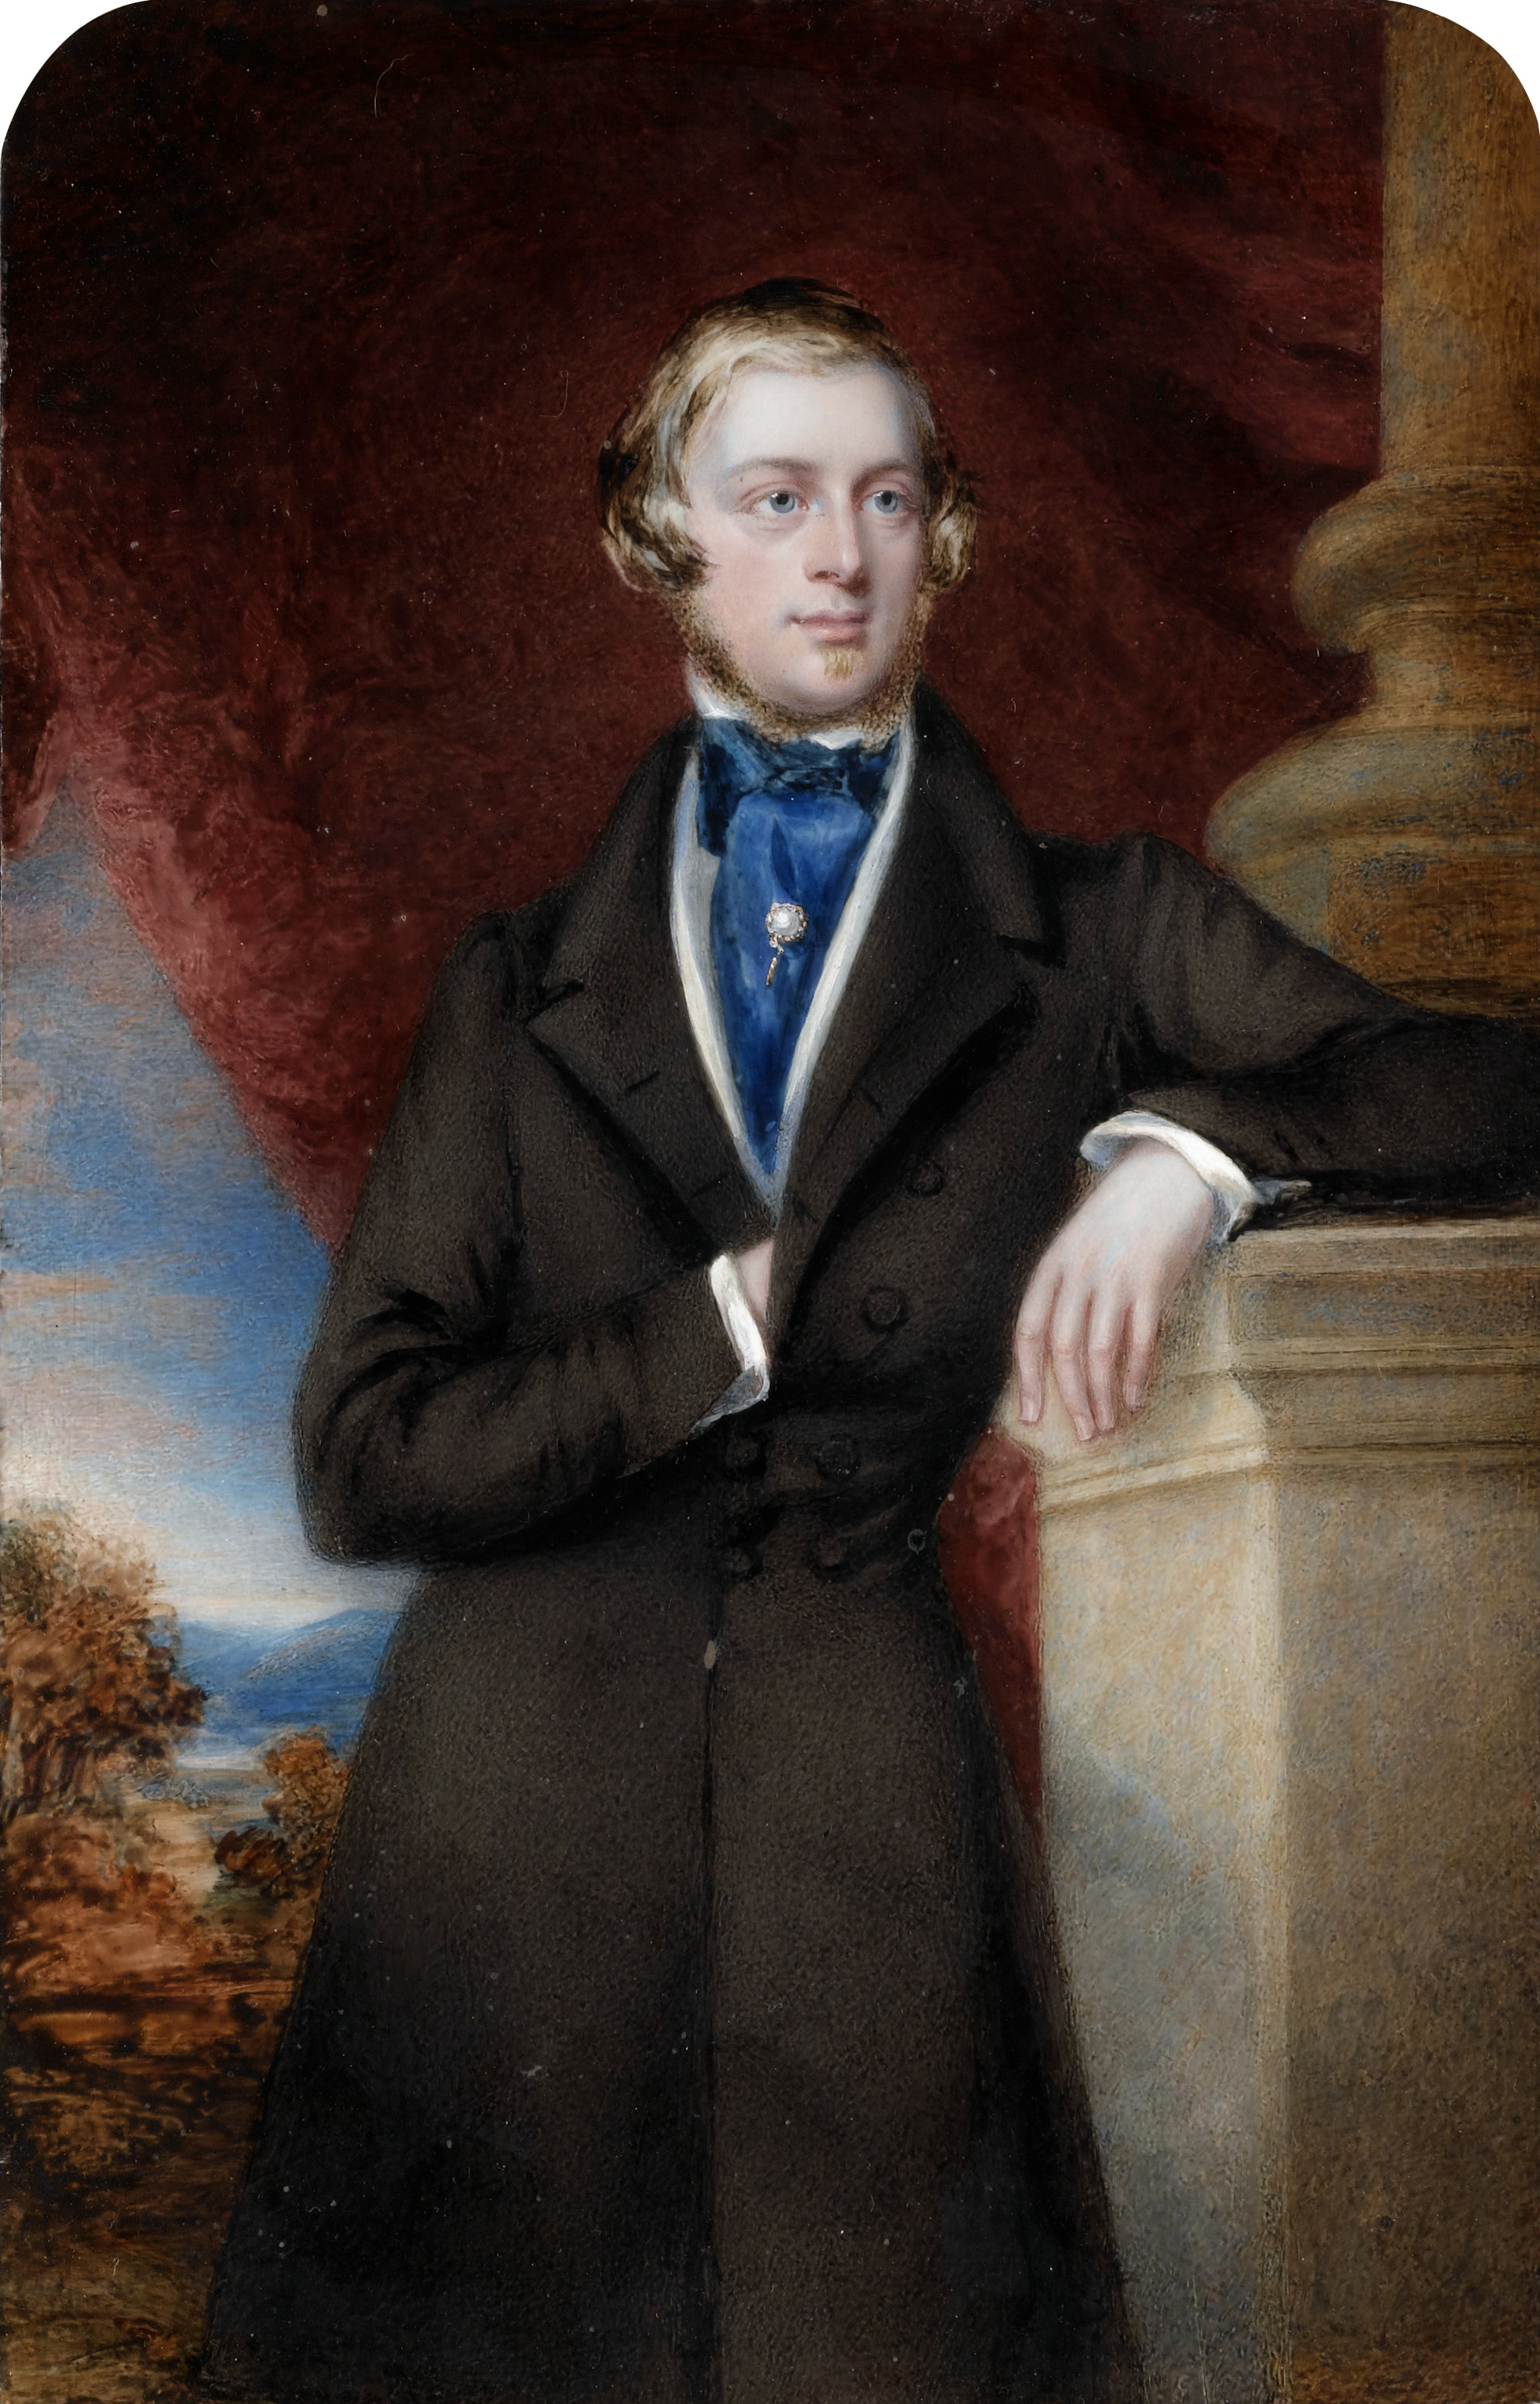 Sir Frederick Milbank, of Barningham Park, who protected poacher Tom Taylor from the wrath of the courts after Tom saved his life